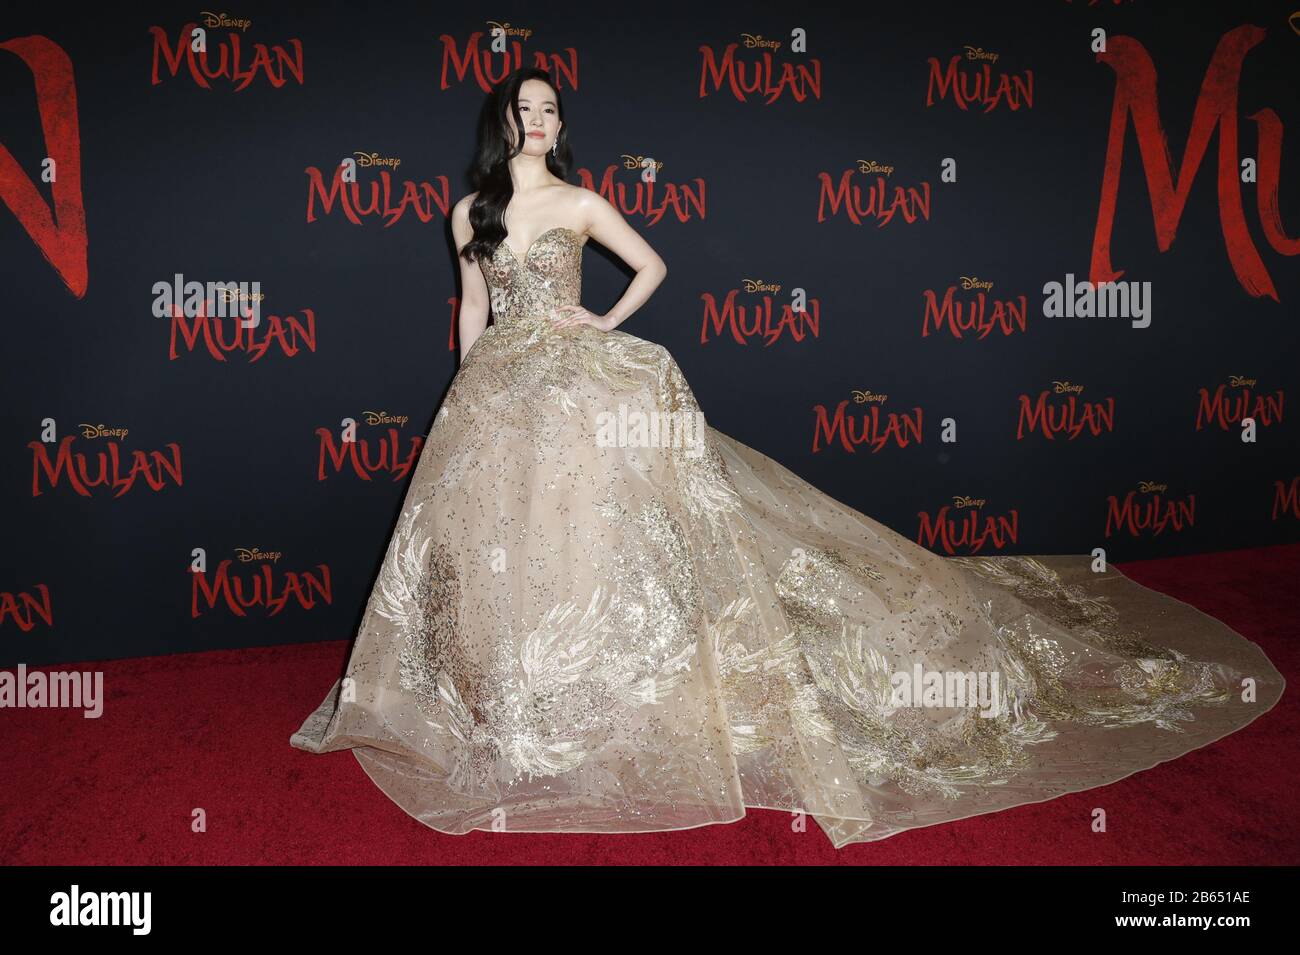 Hollywood, Ca. 9th Mar, 2020. Yifei Liu, at Premiere Of Disney's 'Mulan' at The Dolby Theatre in Hollywood California on March 9, 2020. Credit: Faye Sadou/Media Punch/Alamy Live News Stock Photo